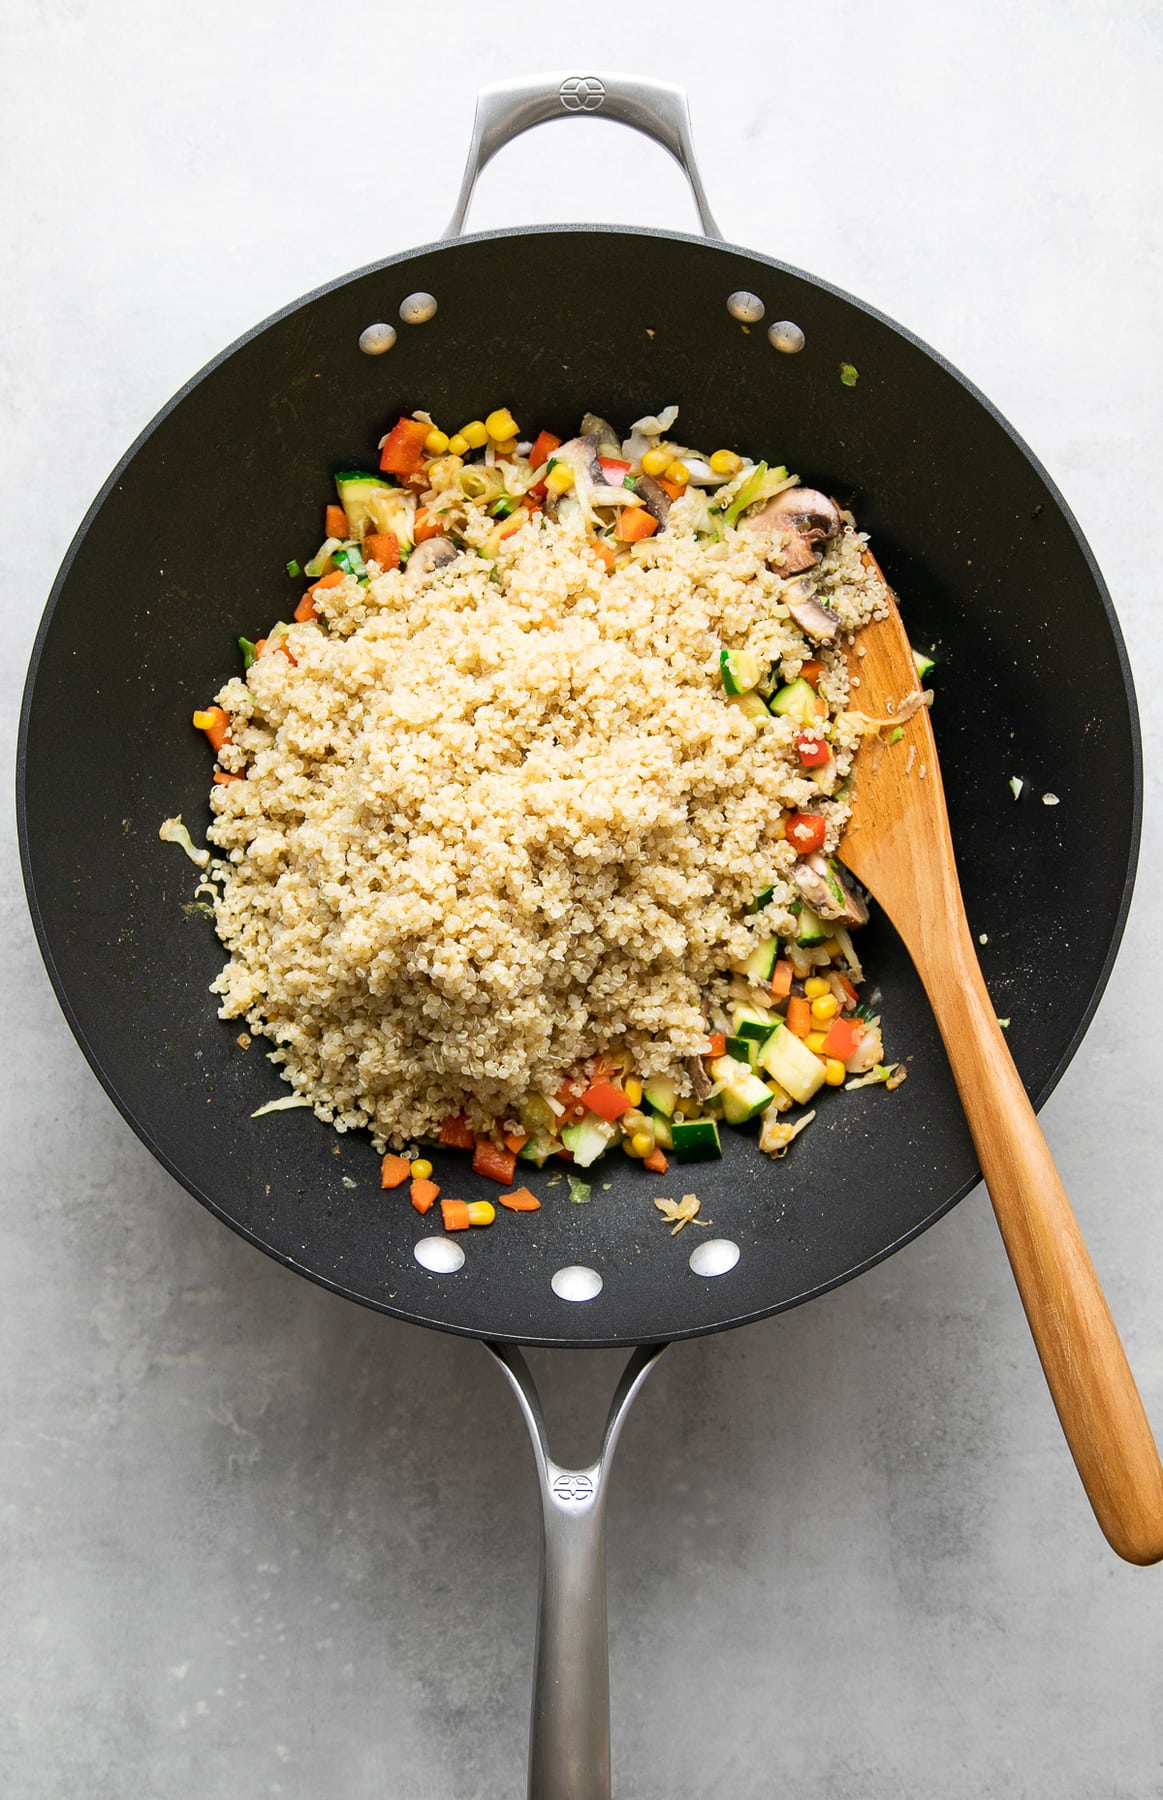 top down view of quinoa added to stir fried veggies to make quinoa fried rice.